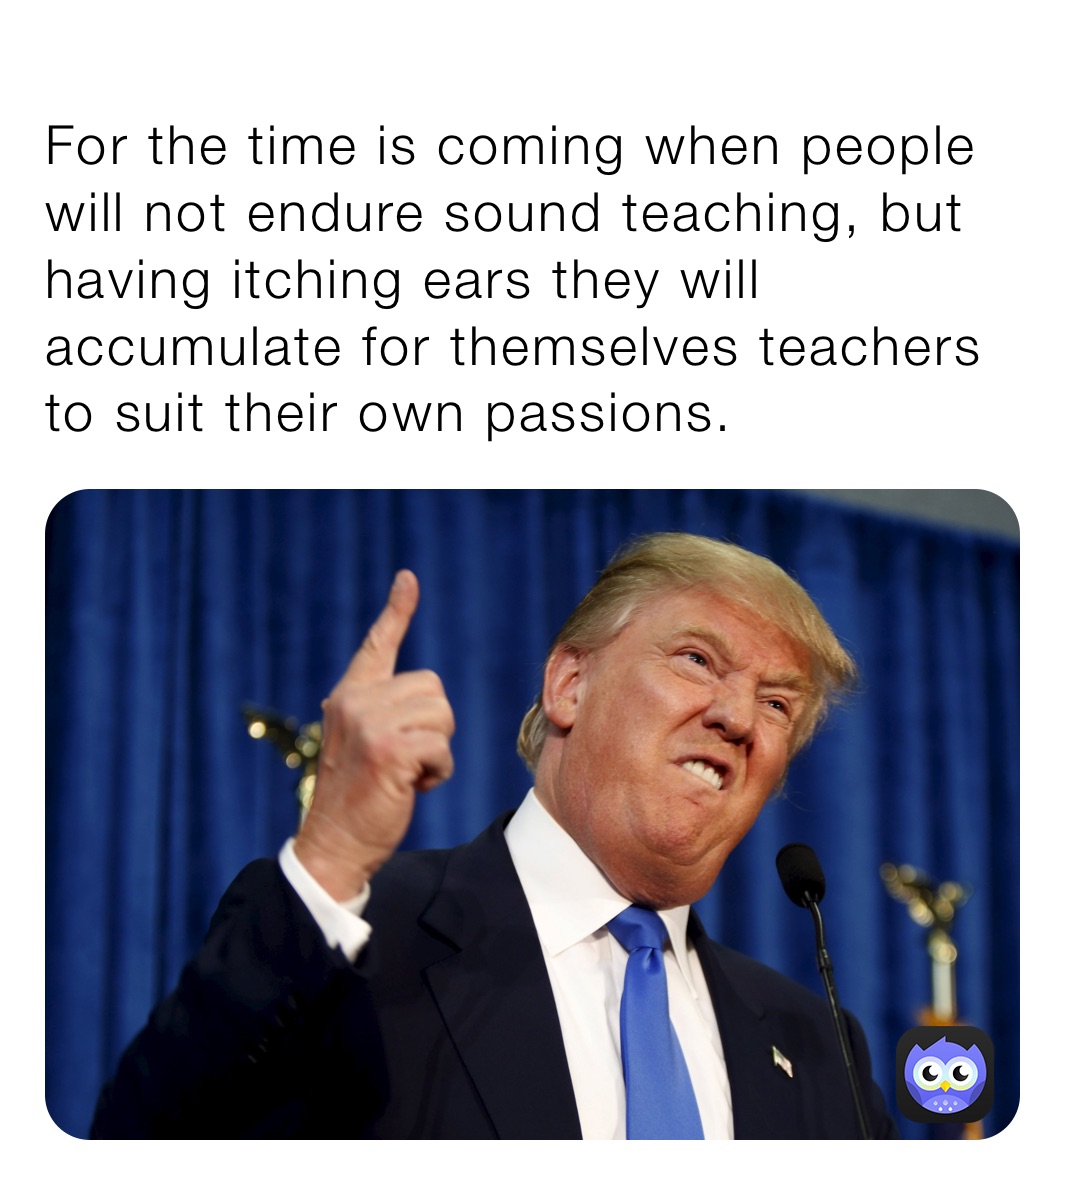 
For the time is coming when people will not endure sound teaching, but having itching ears they will accumulate for themselves teachers to suit their own passions.